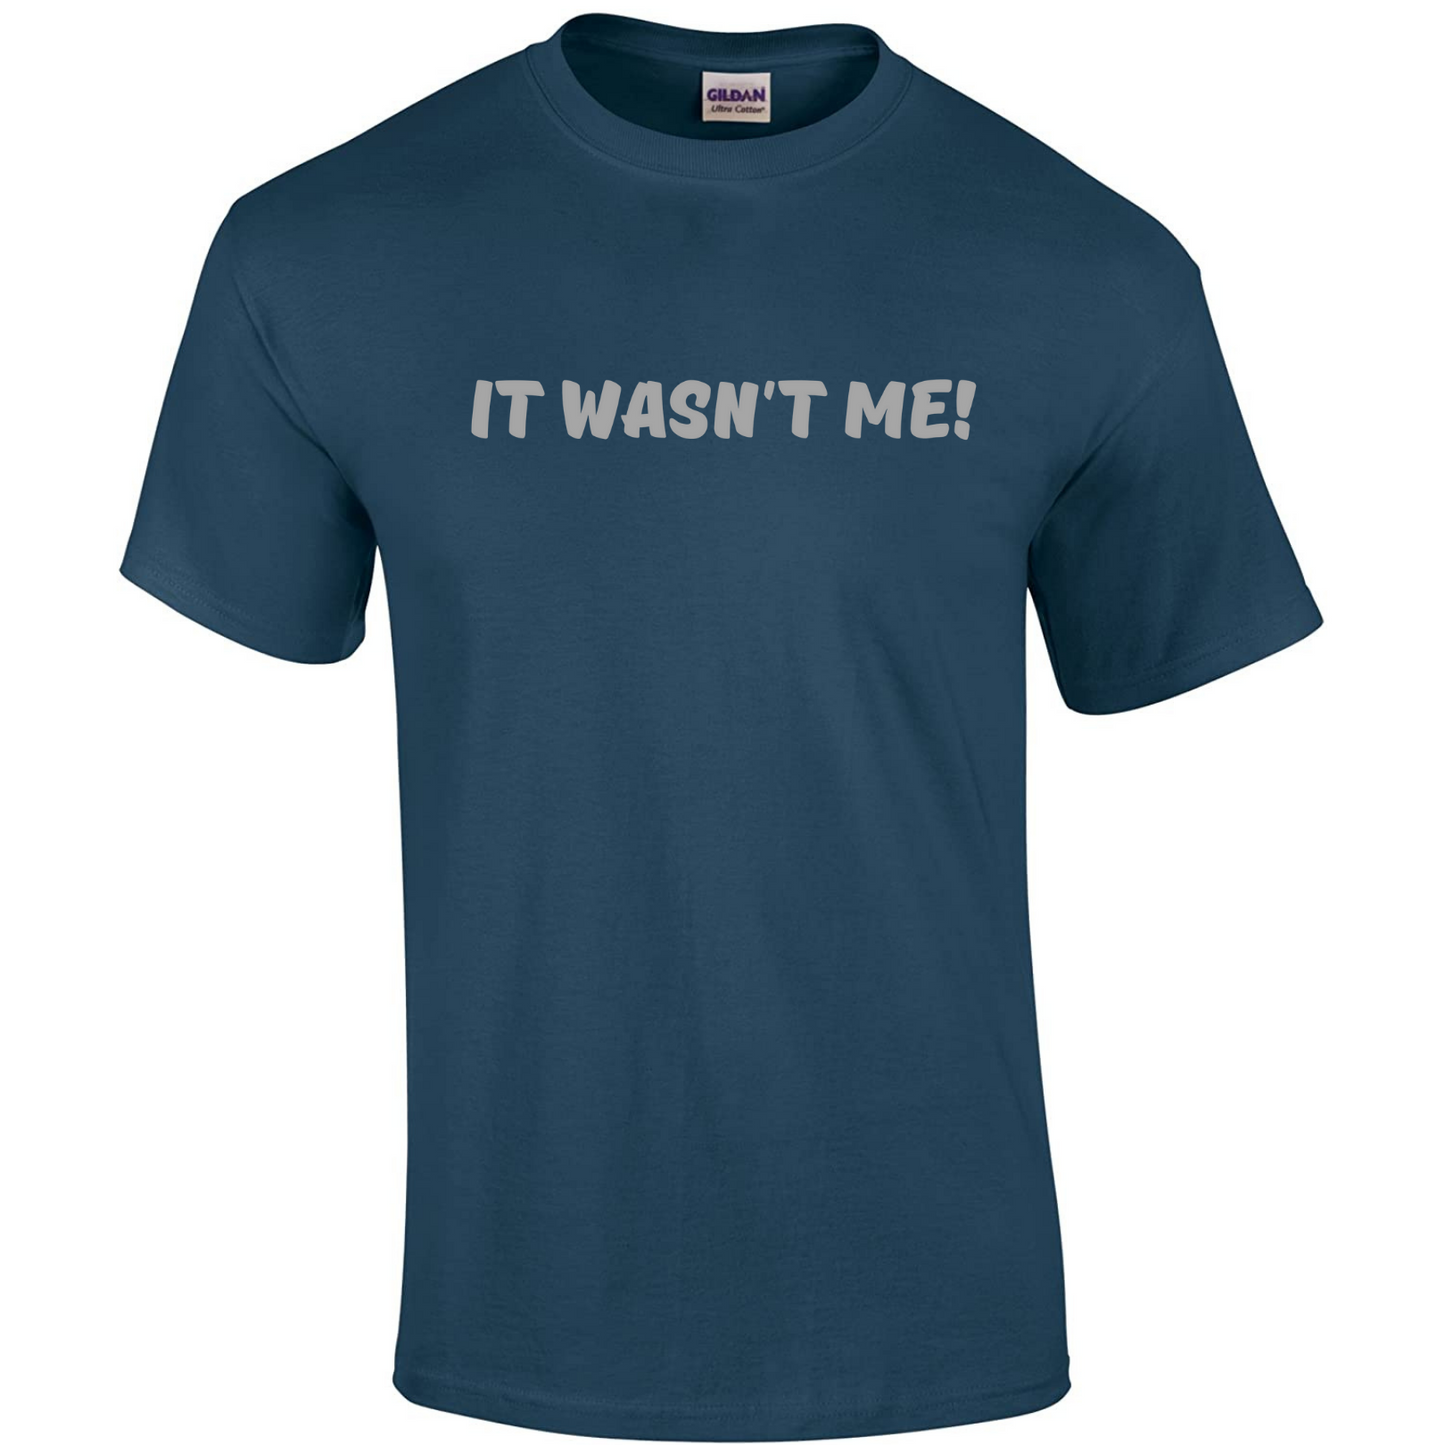 It Wasn't Me! - Graphic T-Shirt - Mister Snarky's